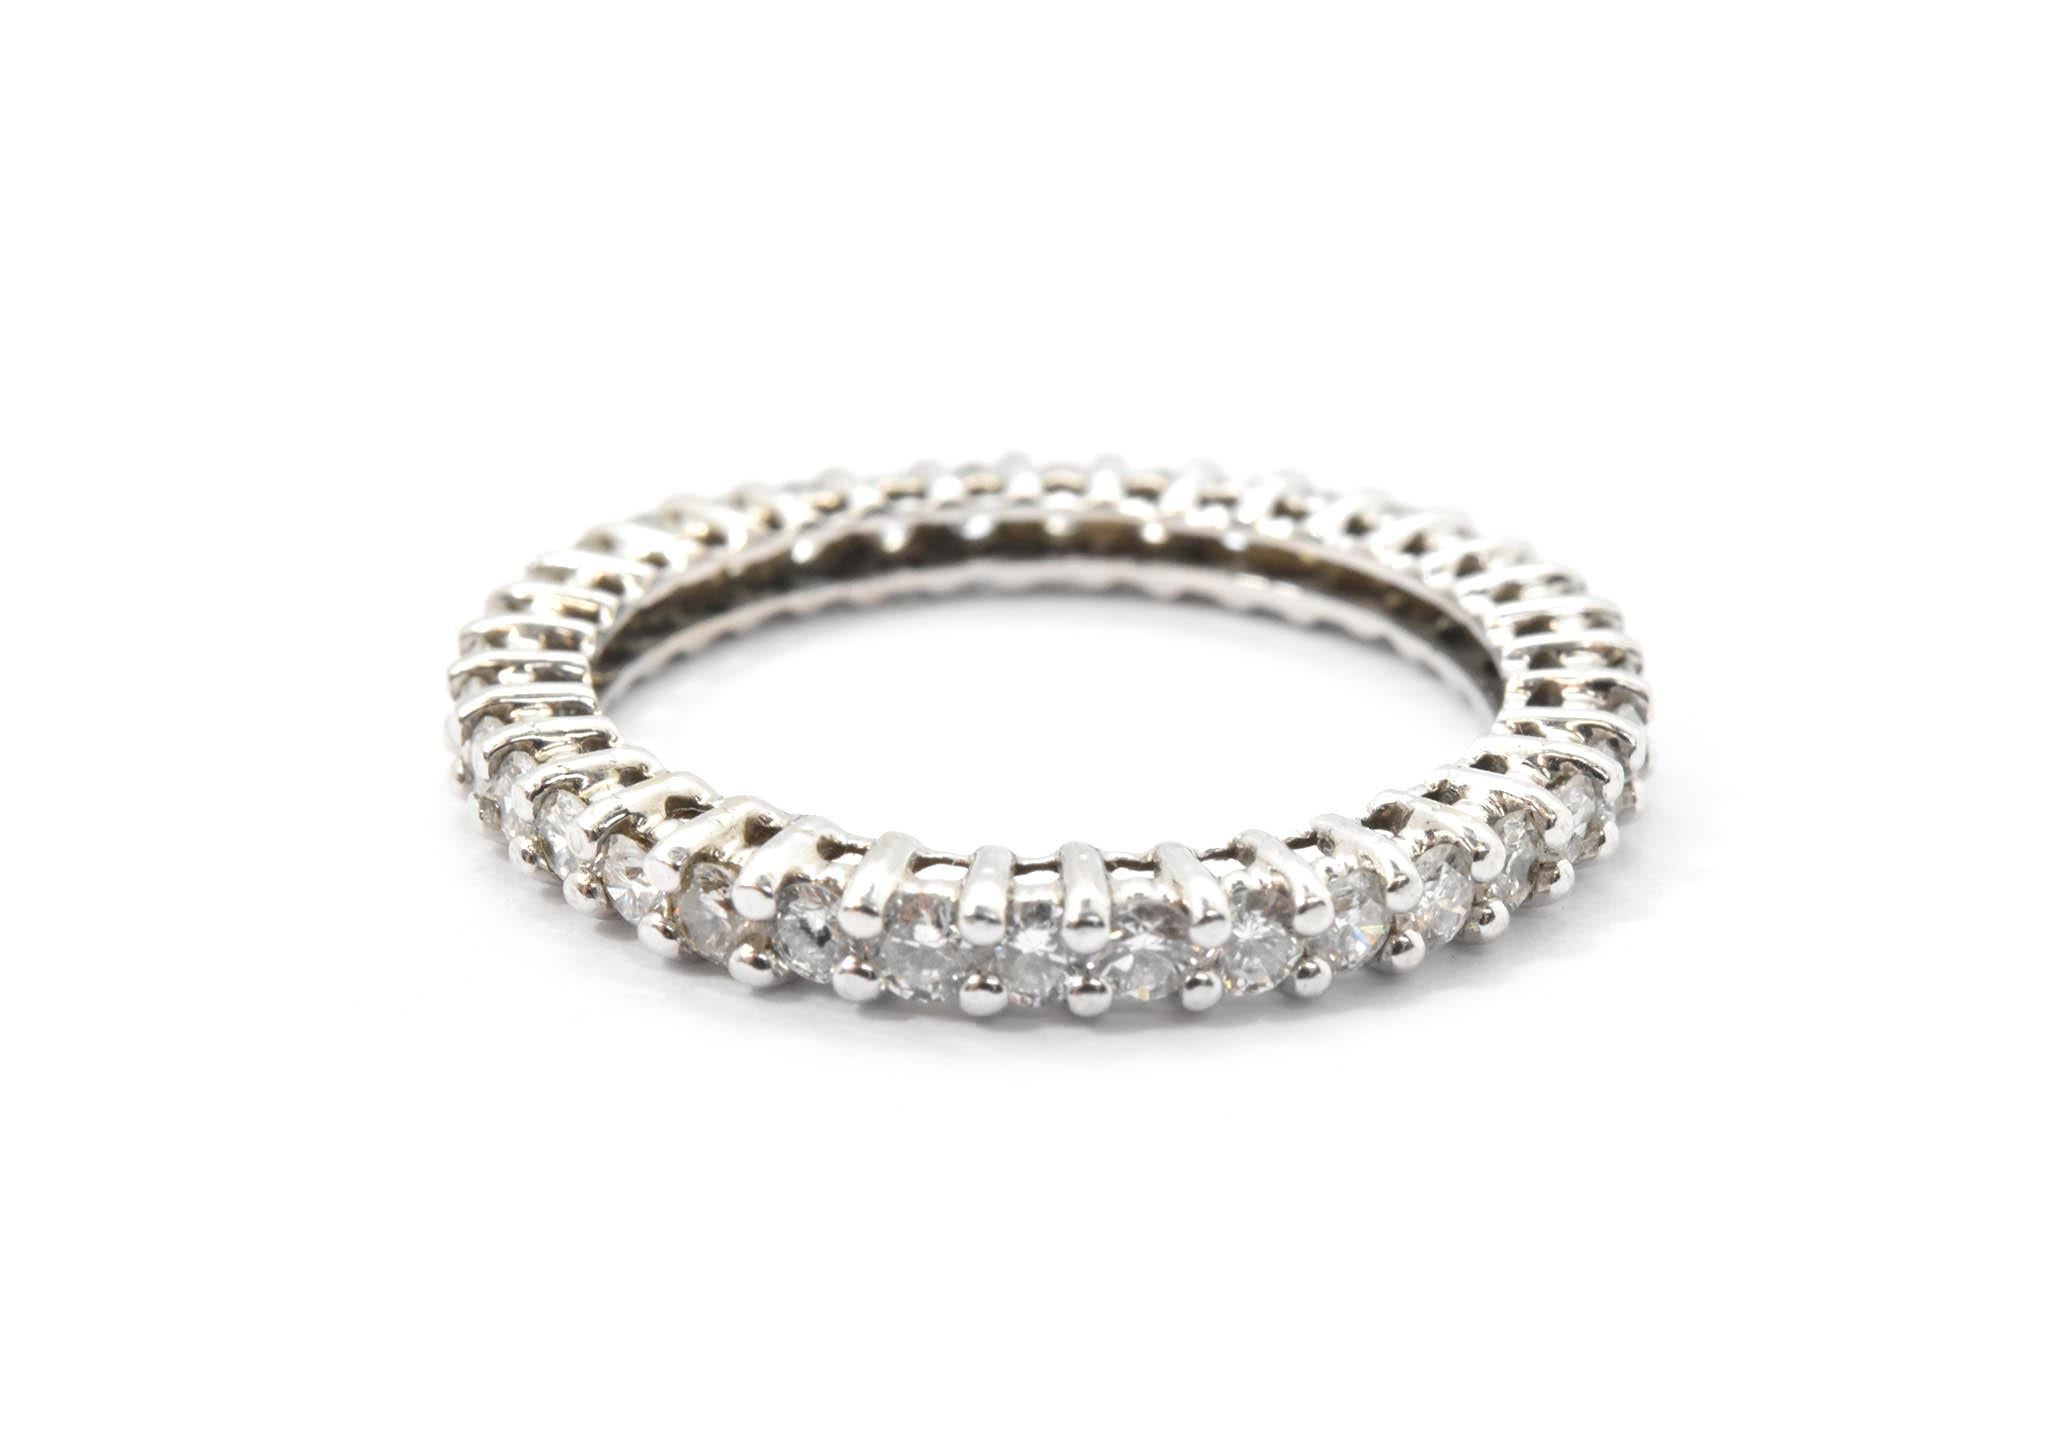 This diamond band has 36 round cut diamonds prong set in 18k white gold eternity style band. The 36 round diamonds combined weigh 0.75 carats, and are graded G in color and VS-SI in clarity. The mounting of this ring is beautifully made with white